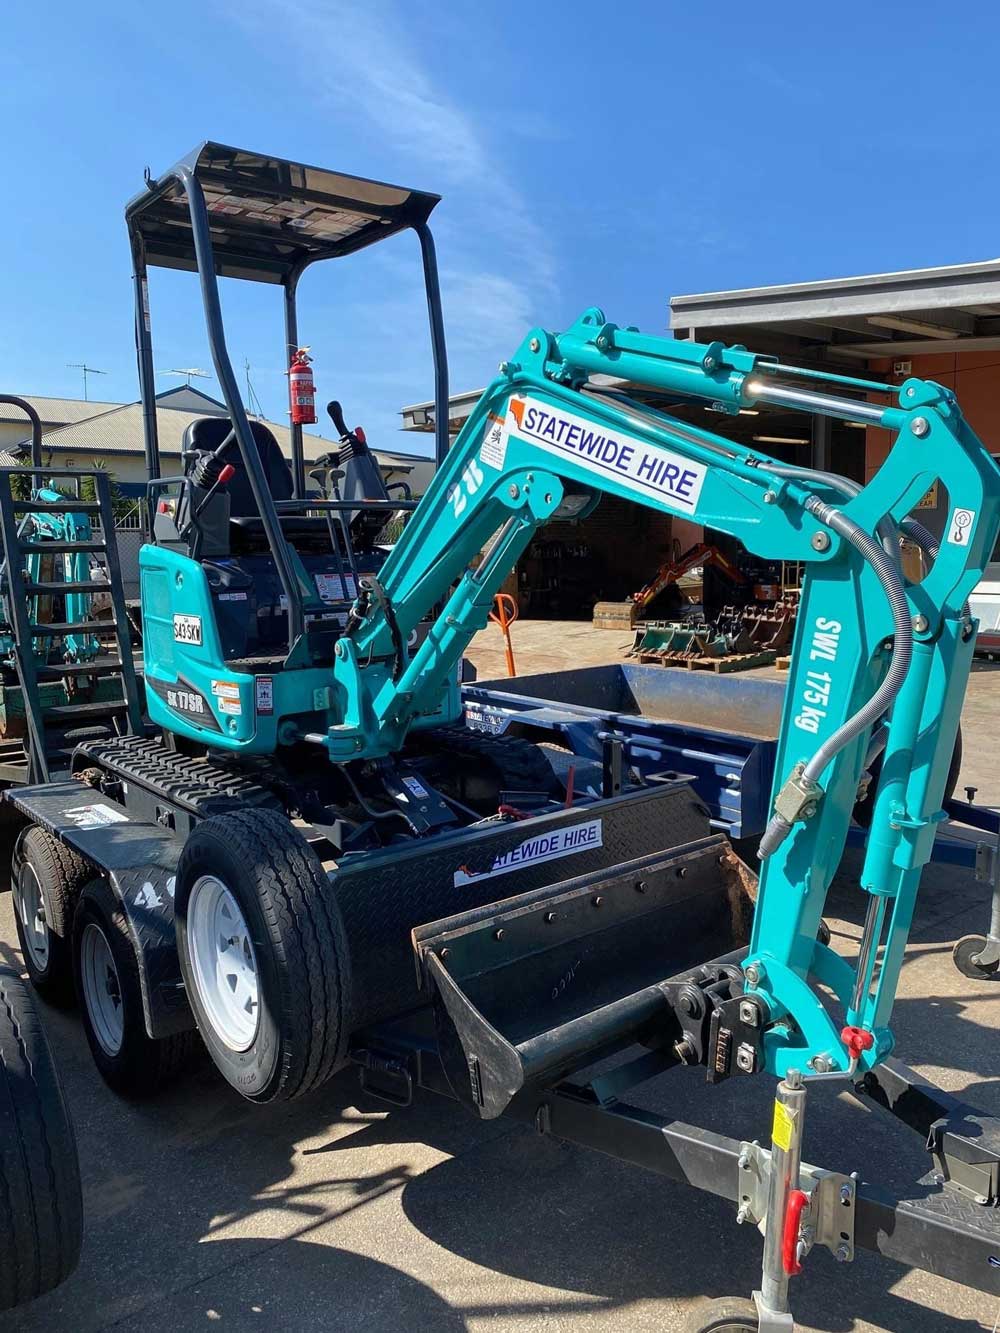 Teal excavator available for excavator hire in Adelaide